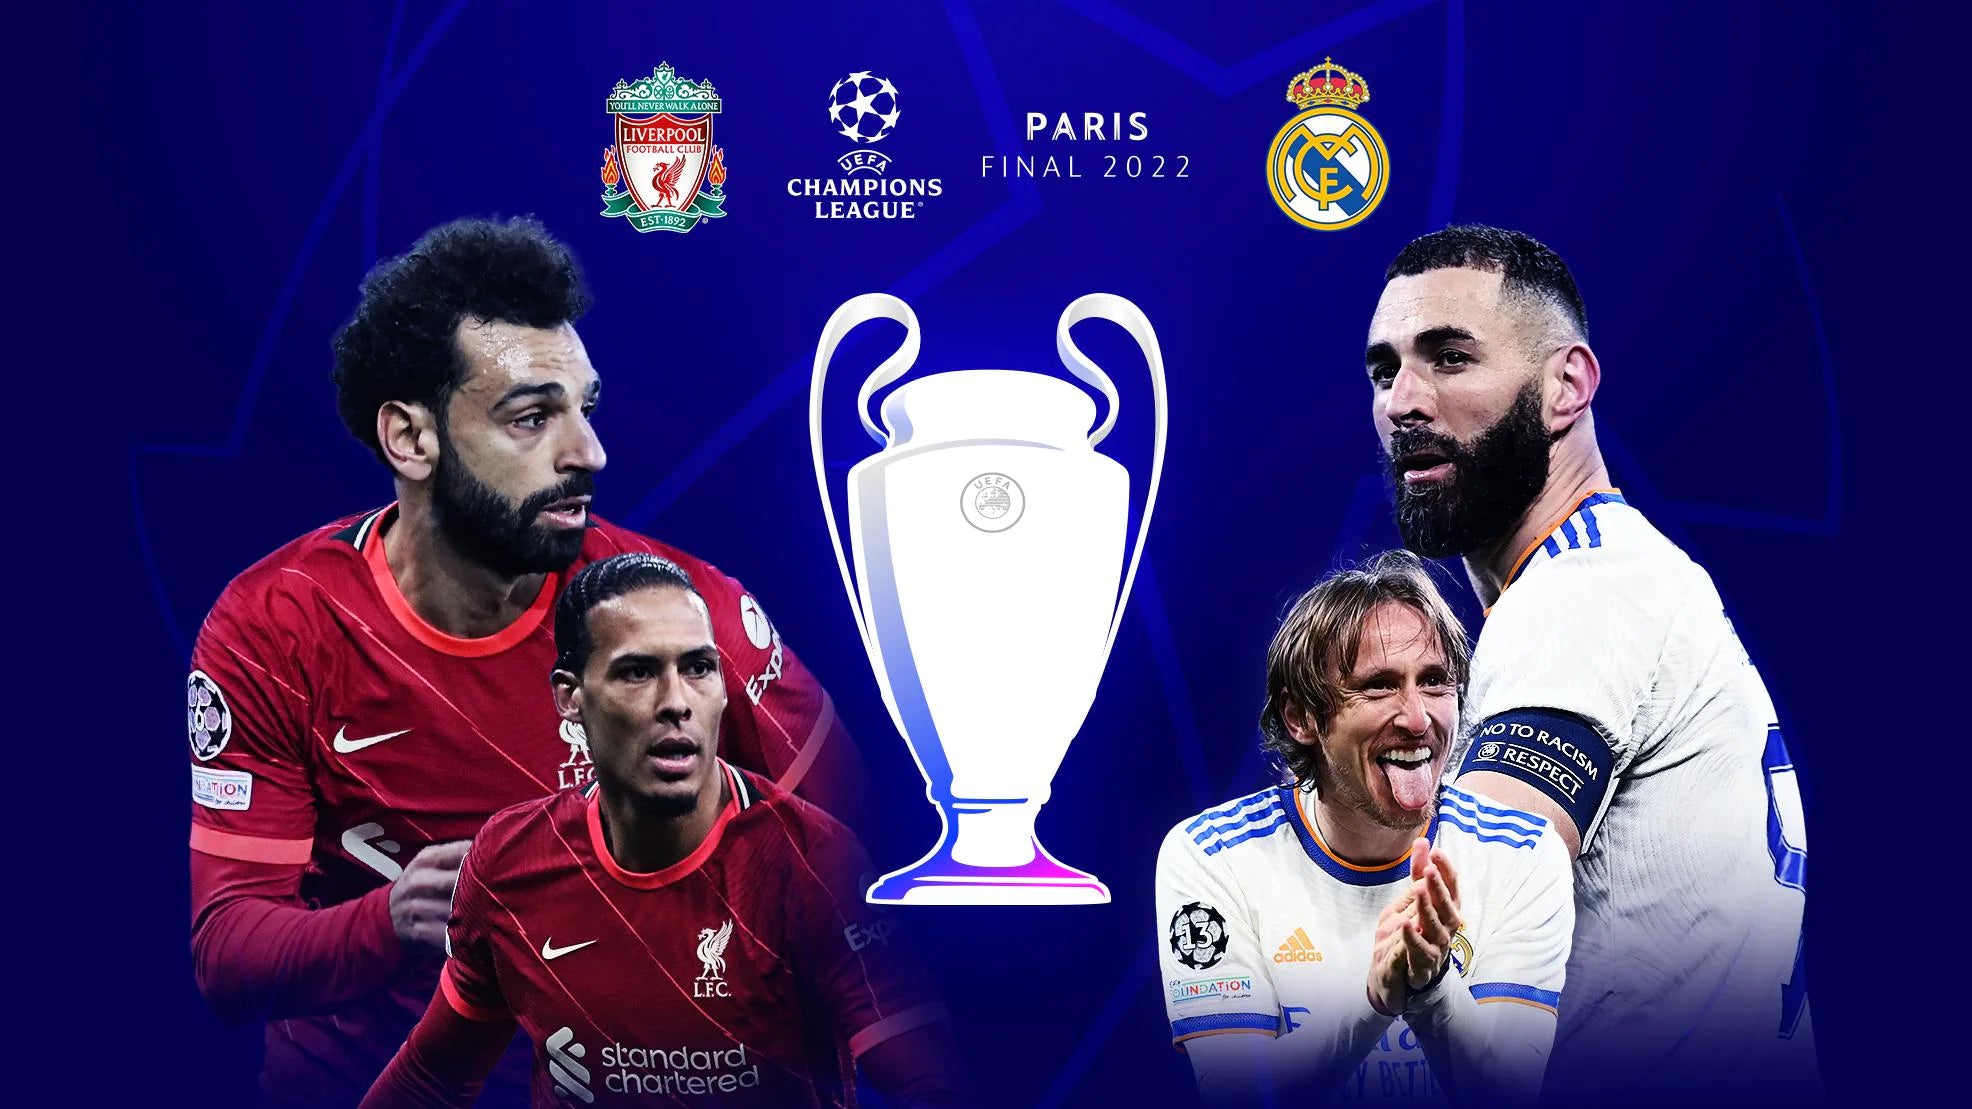 UEFA Champions League Final 2022 - Everything you need to know